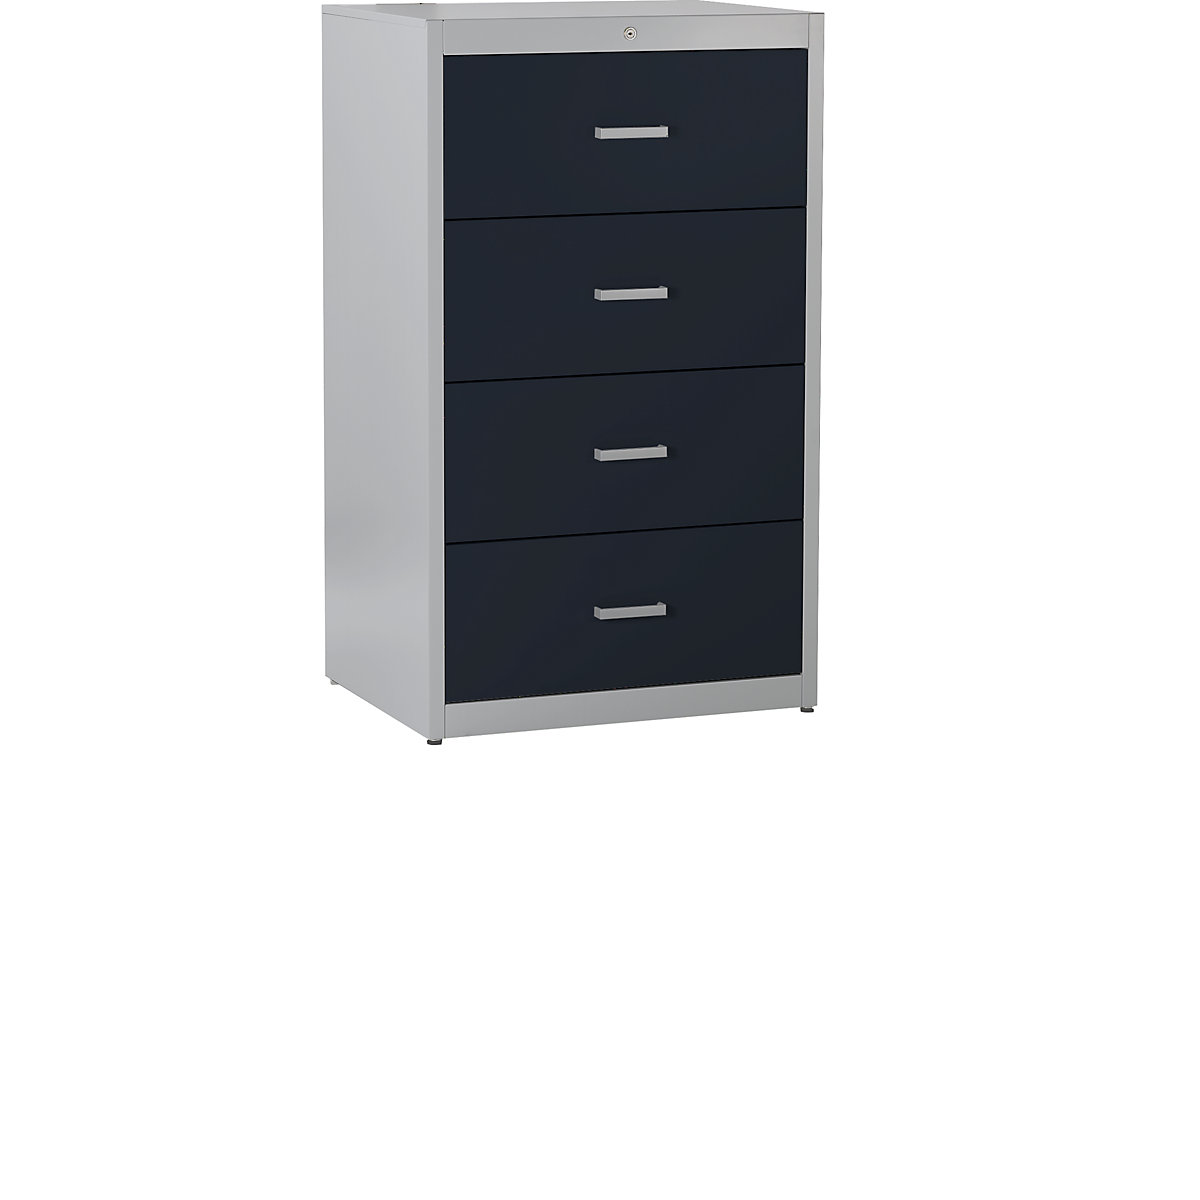 Suspension file cabinet, bar handles – mauser, 4 drawers, soft retraction mechanism, 2-track, white aluminium / charcoal-7